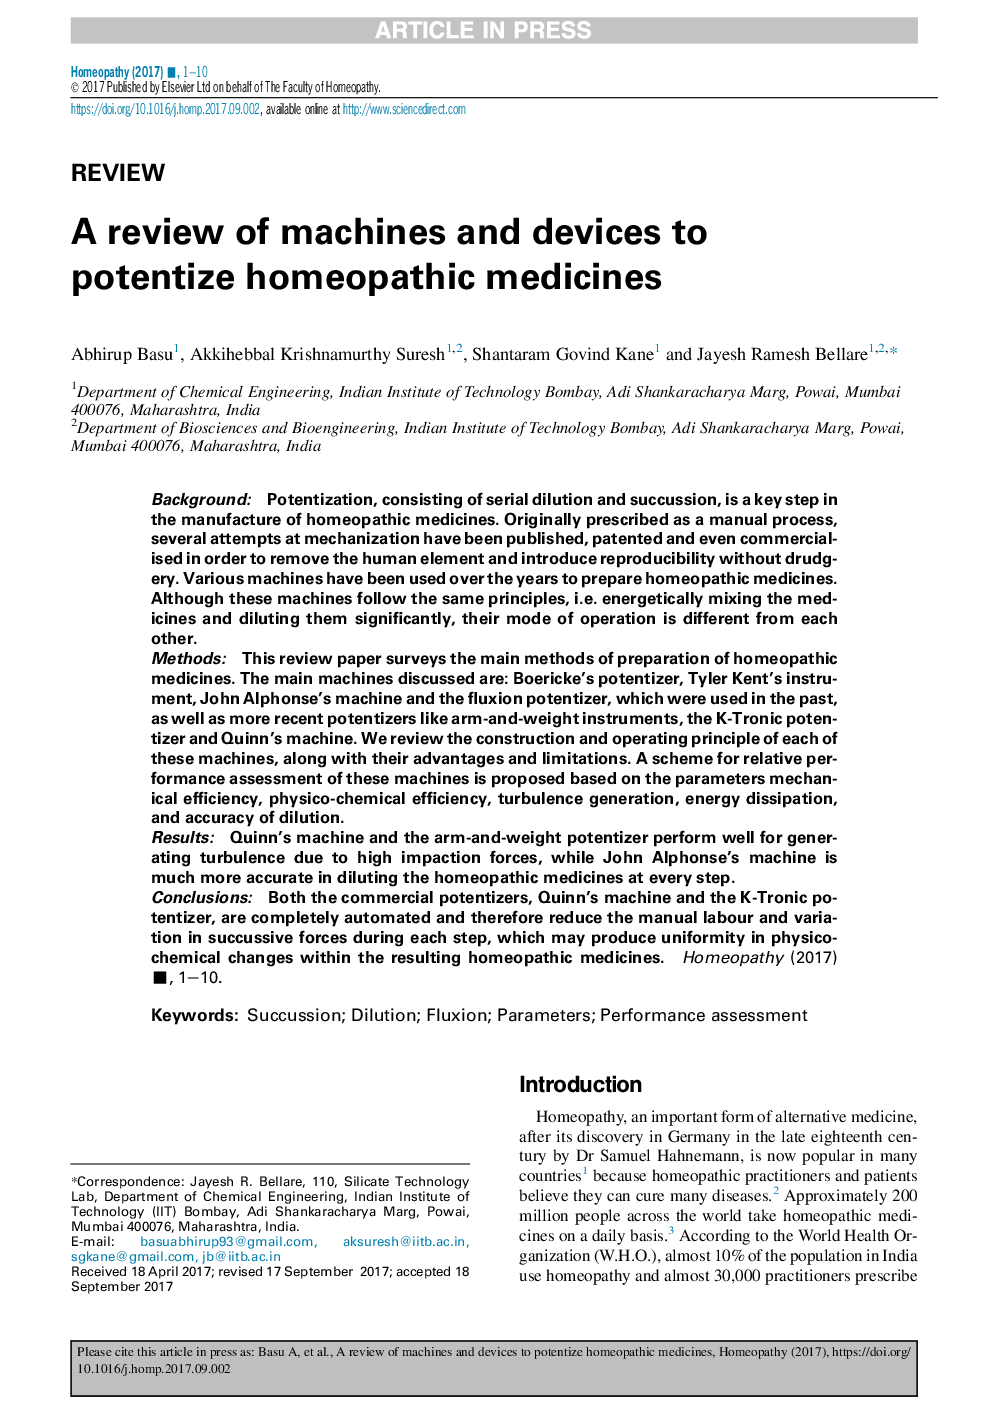 A review of machines and devices to potentize homeopathic medicines